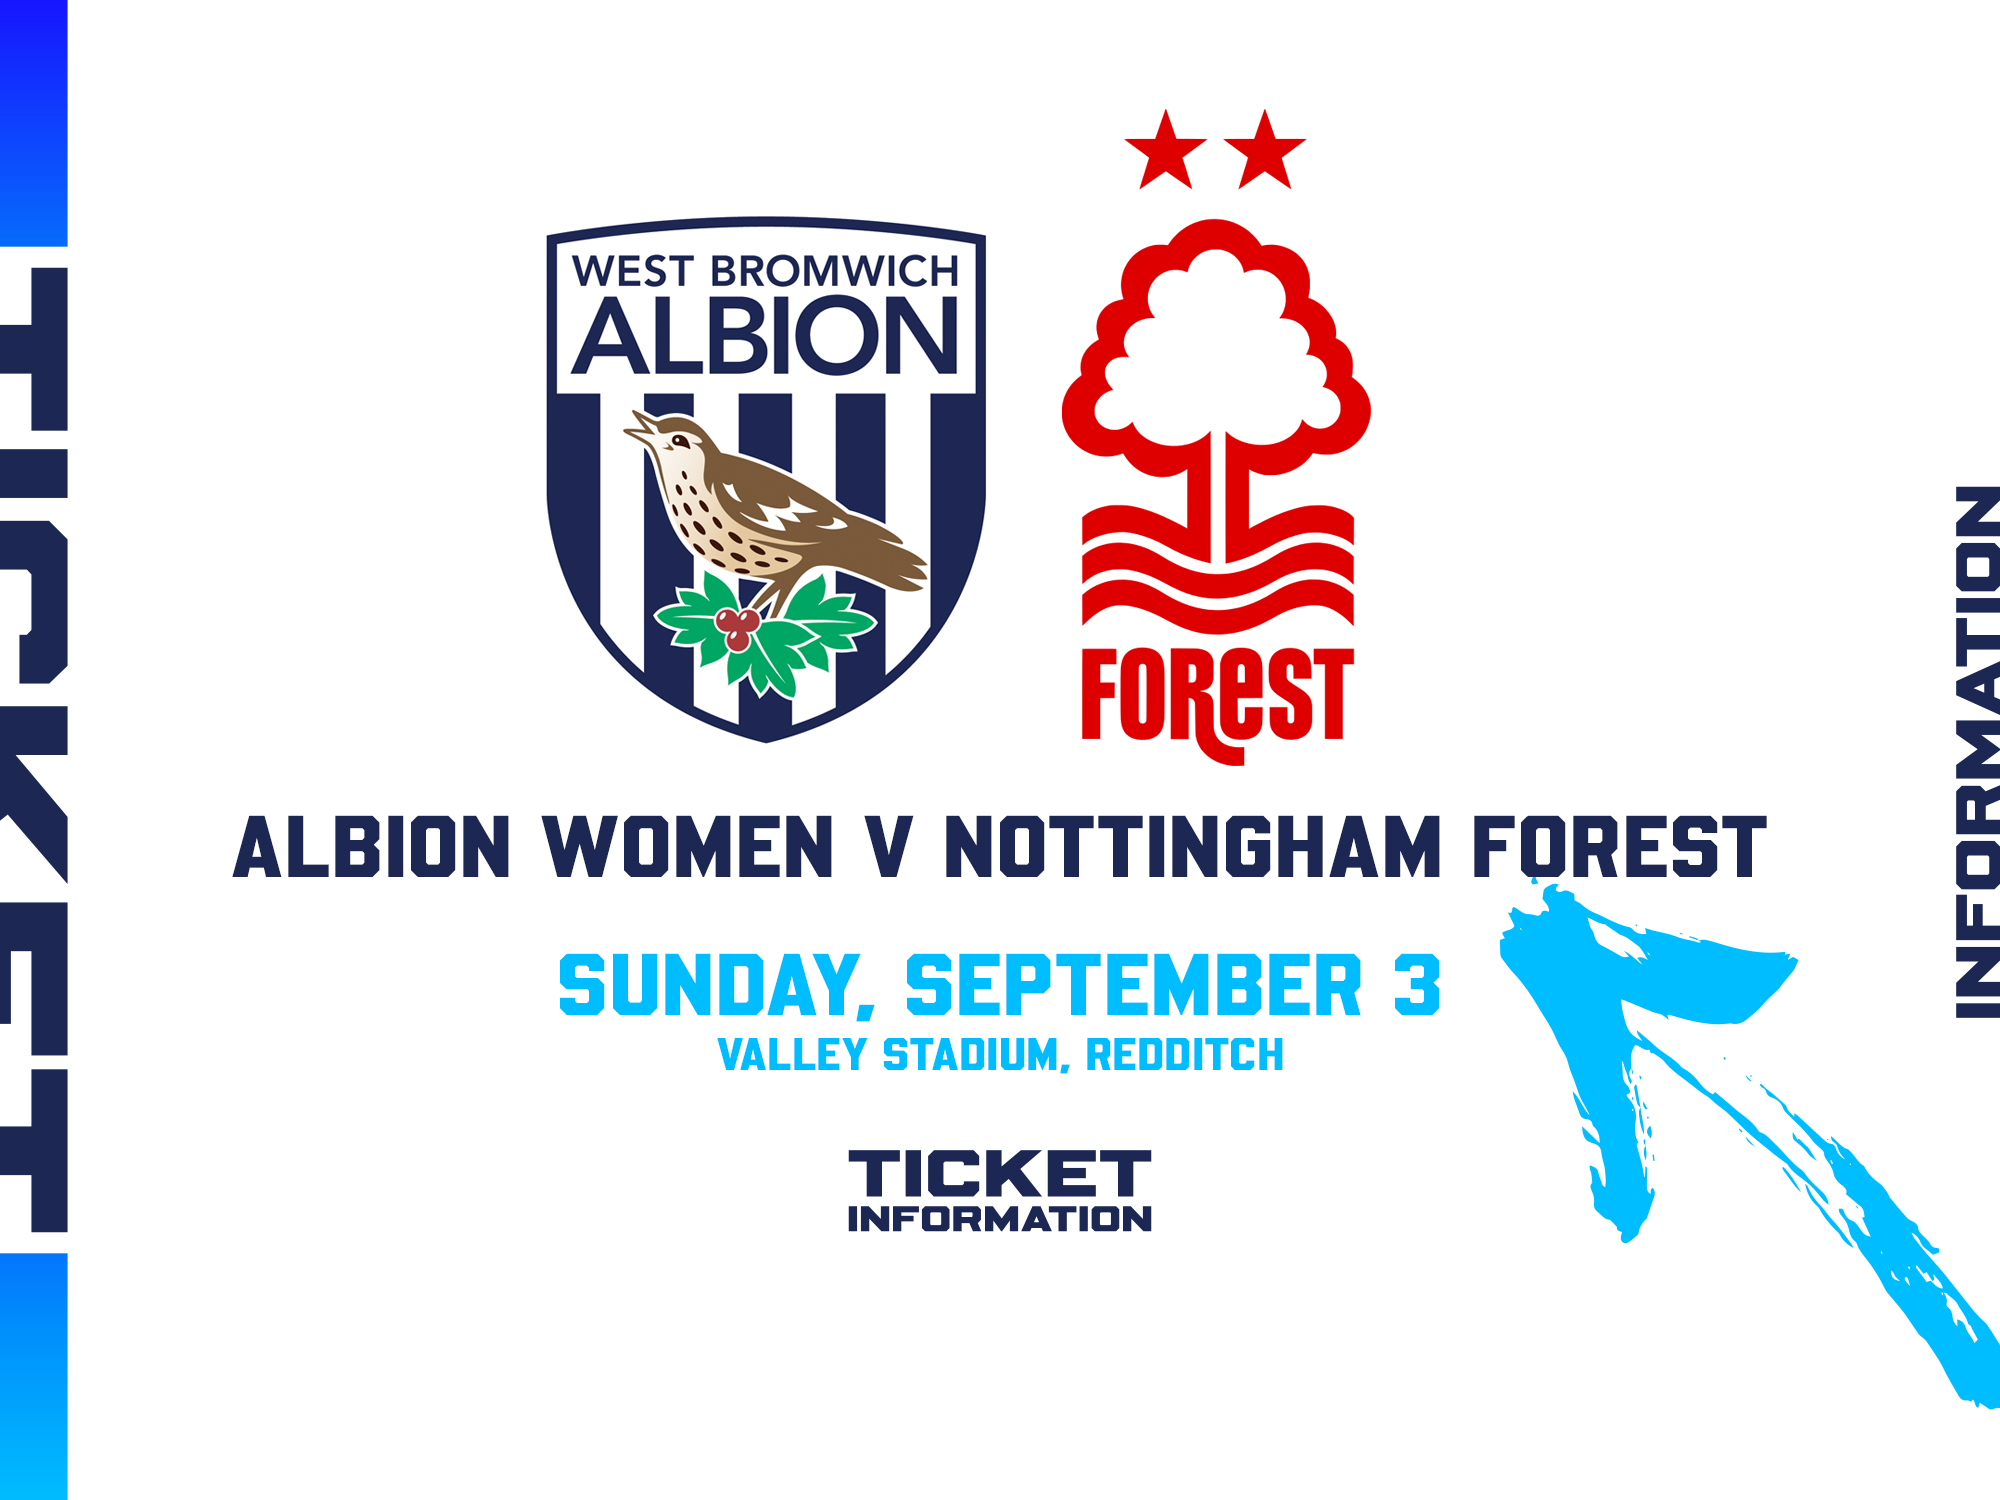 A ticket graphic for Albion Women's game against Nottingham Forest